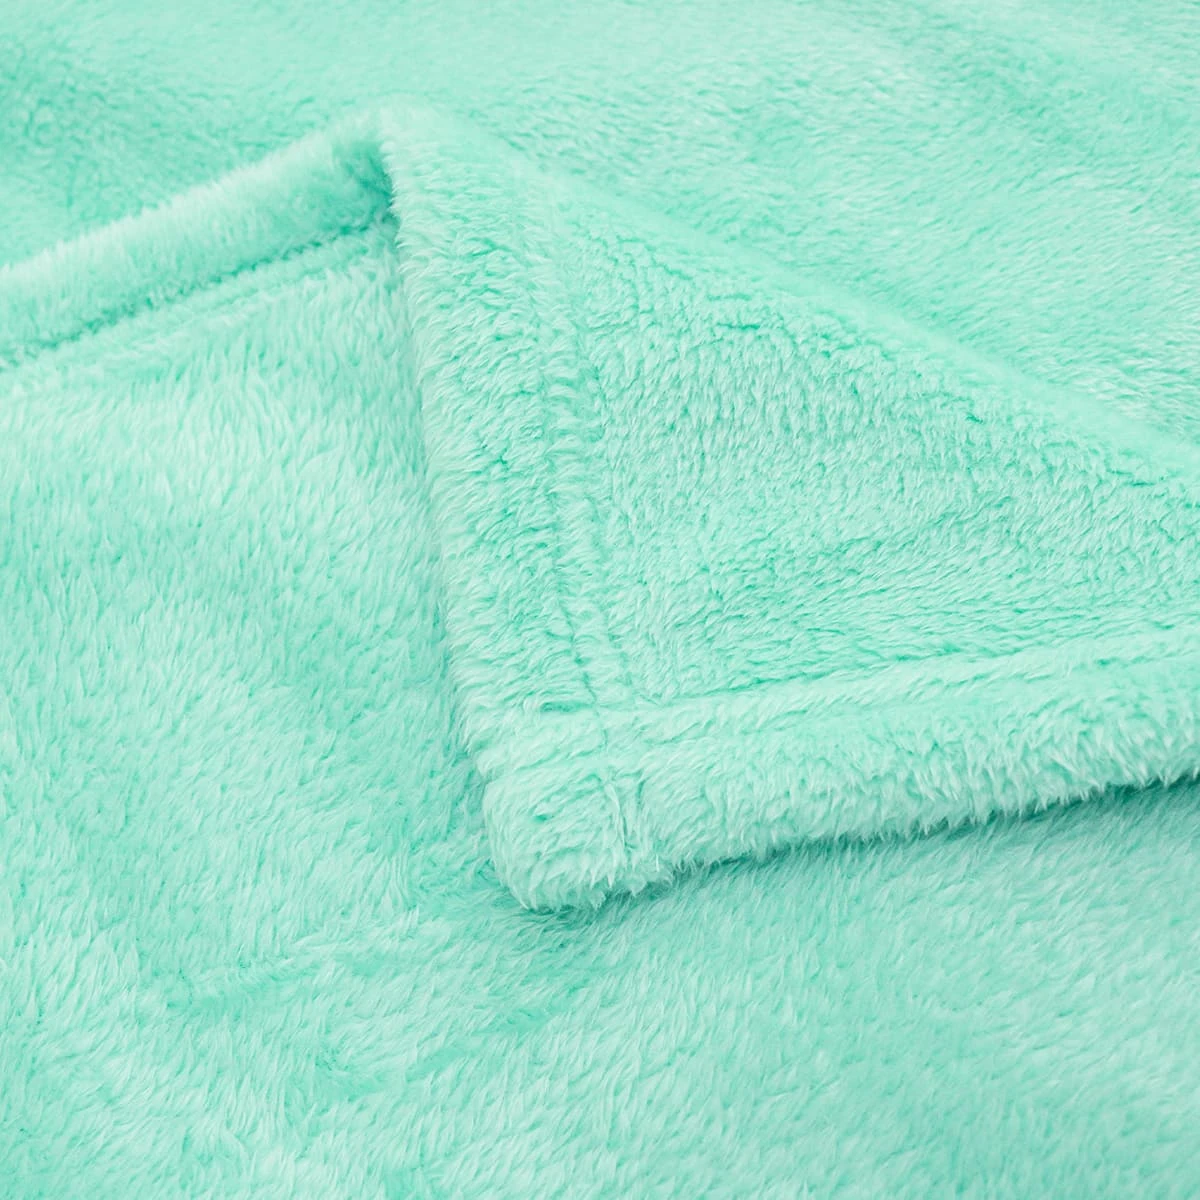 Windy Embroidery Plush Baby Blanket (Green)